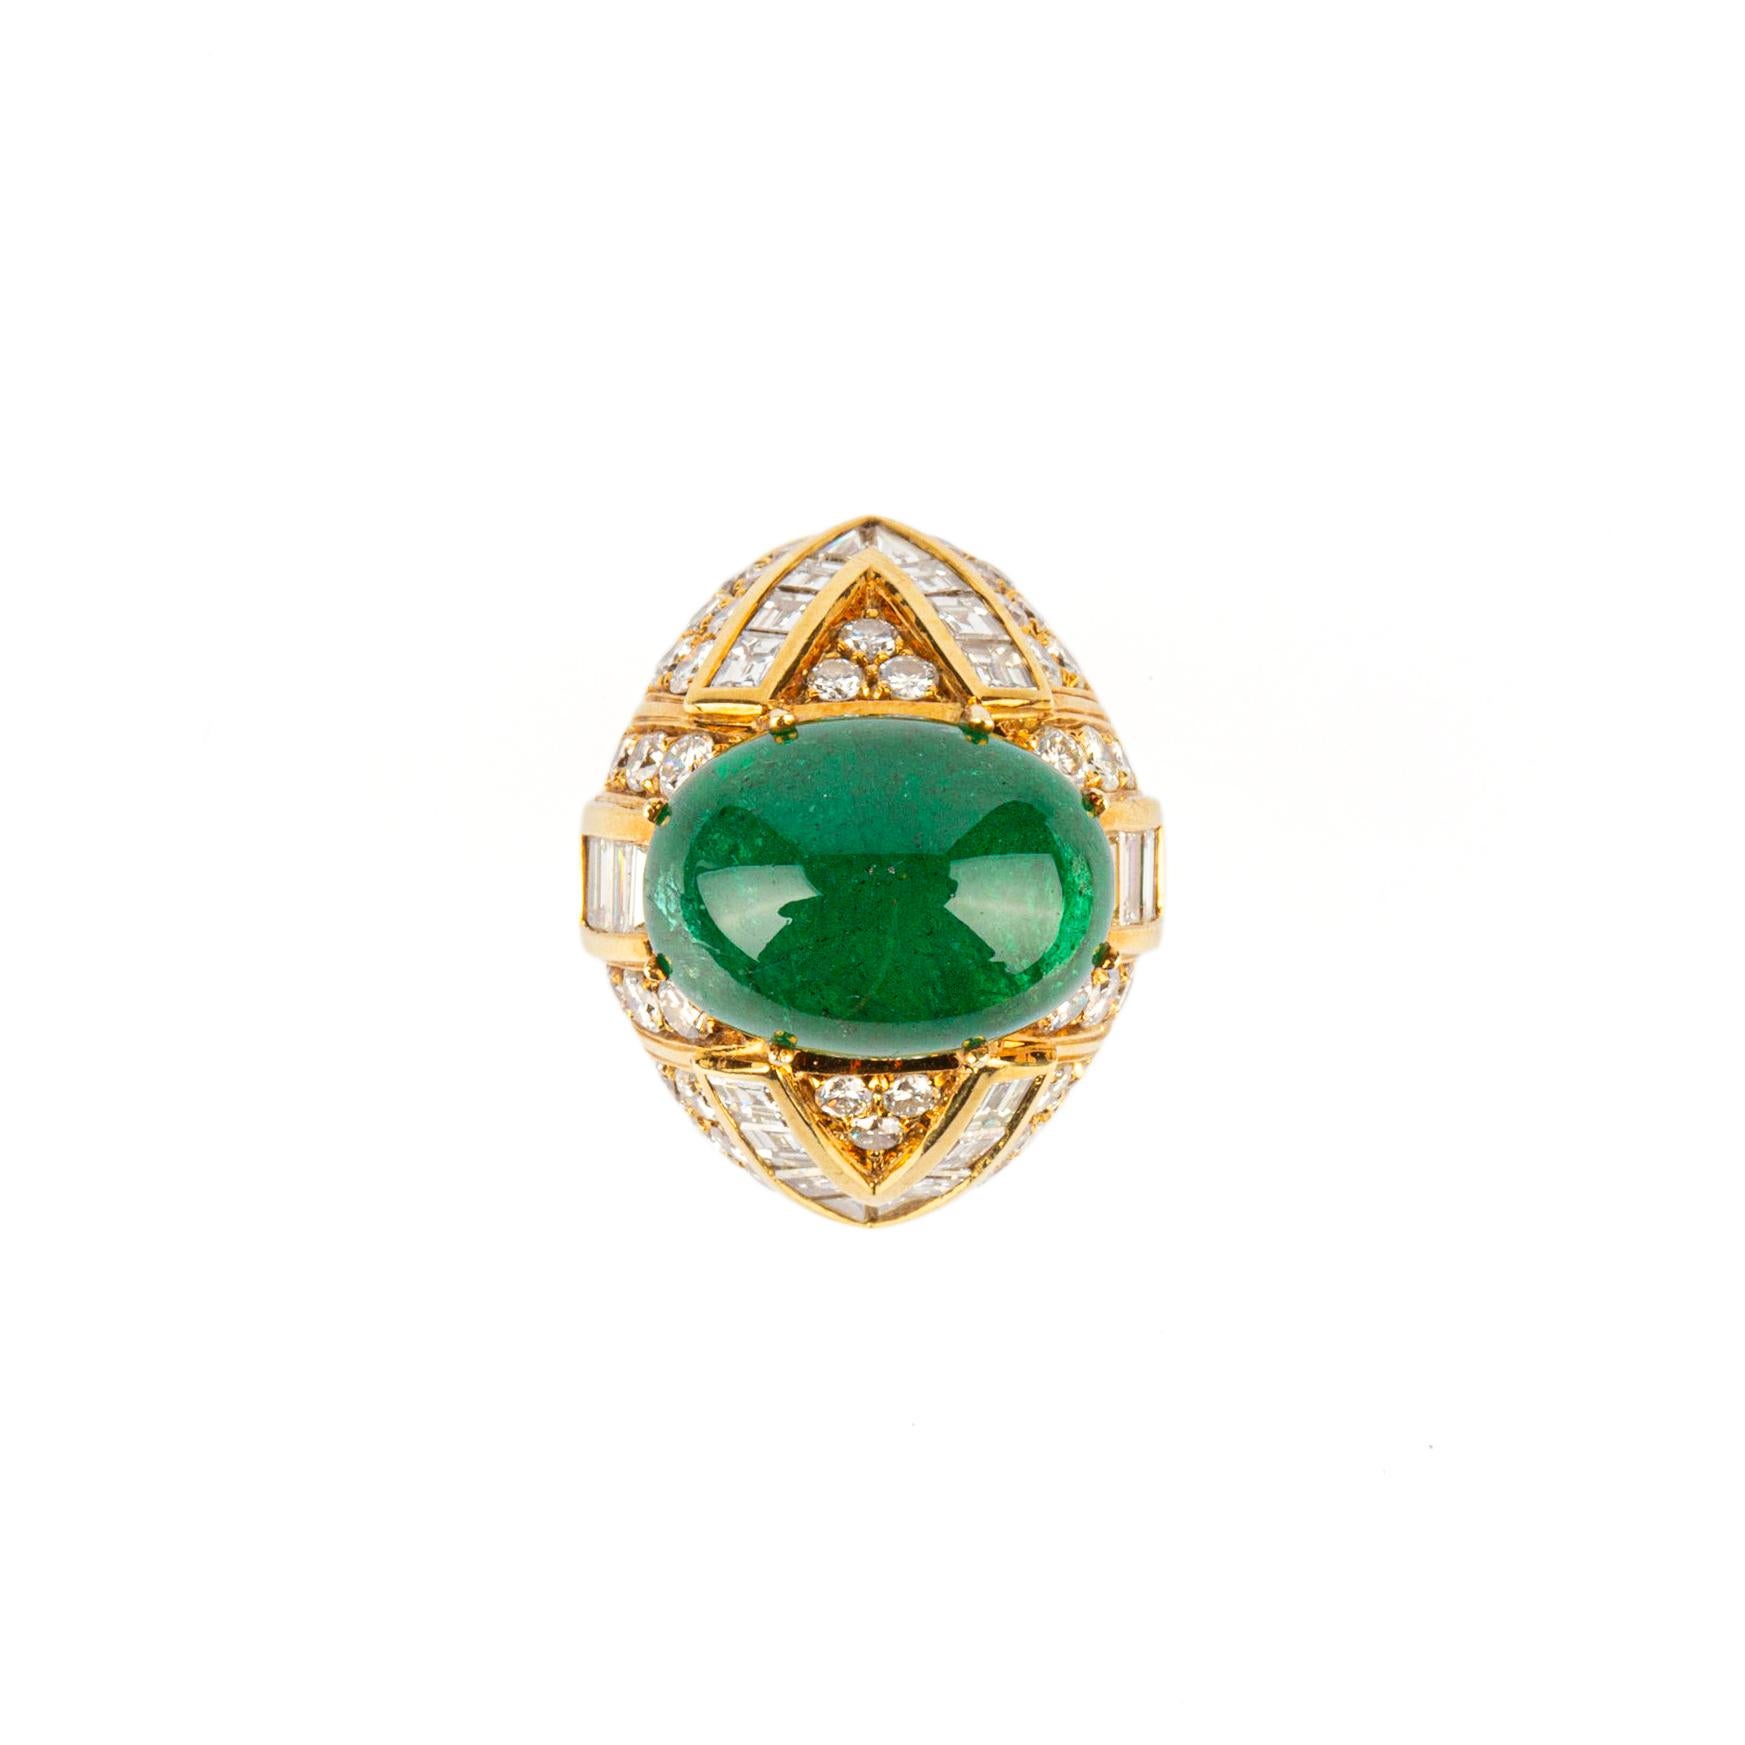 A refined ring showcasing a fine cabochon emerald (appx. 9 cts) mounted in 18k yellow gold with baguette and round-cut diamonds, by Giovane. Made in Italy, circa 1980